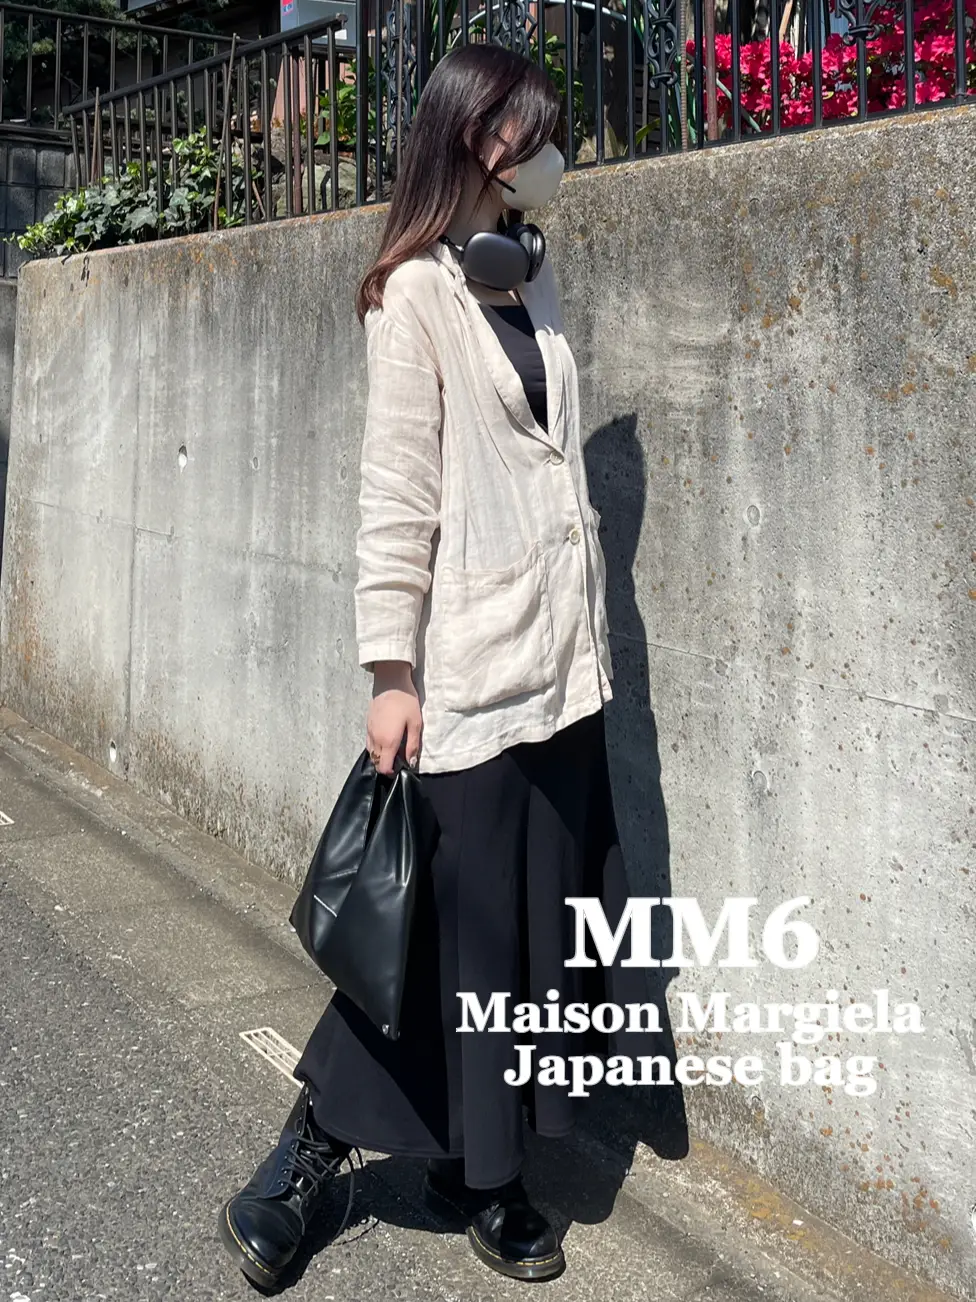 MM6 Maison Margiela Japanese bag | Gallery posted by hina | 174cm